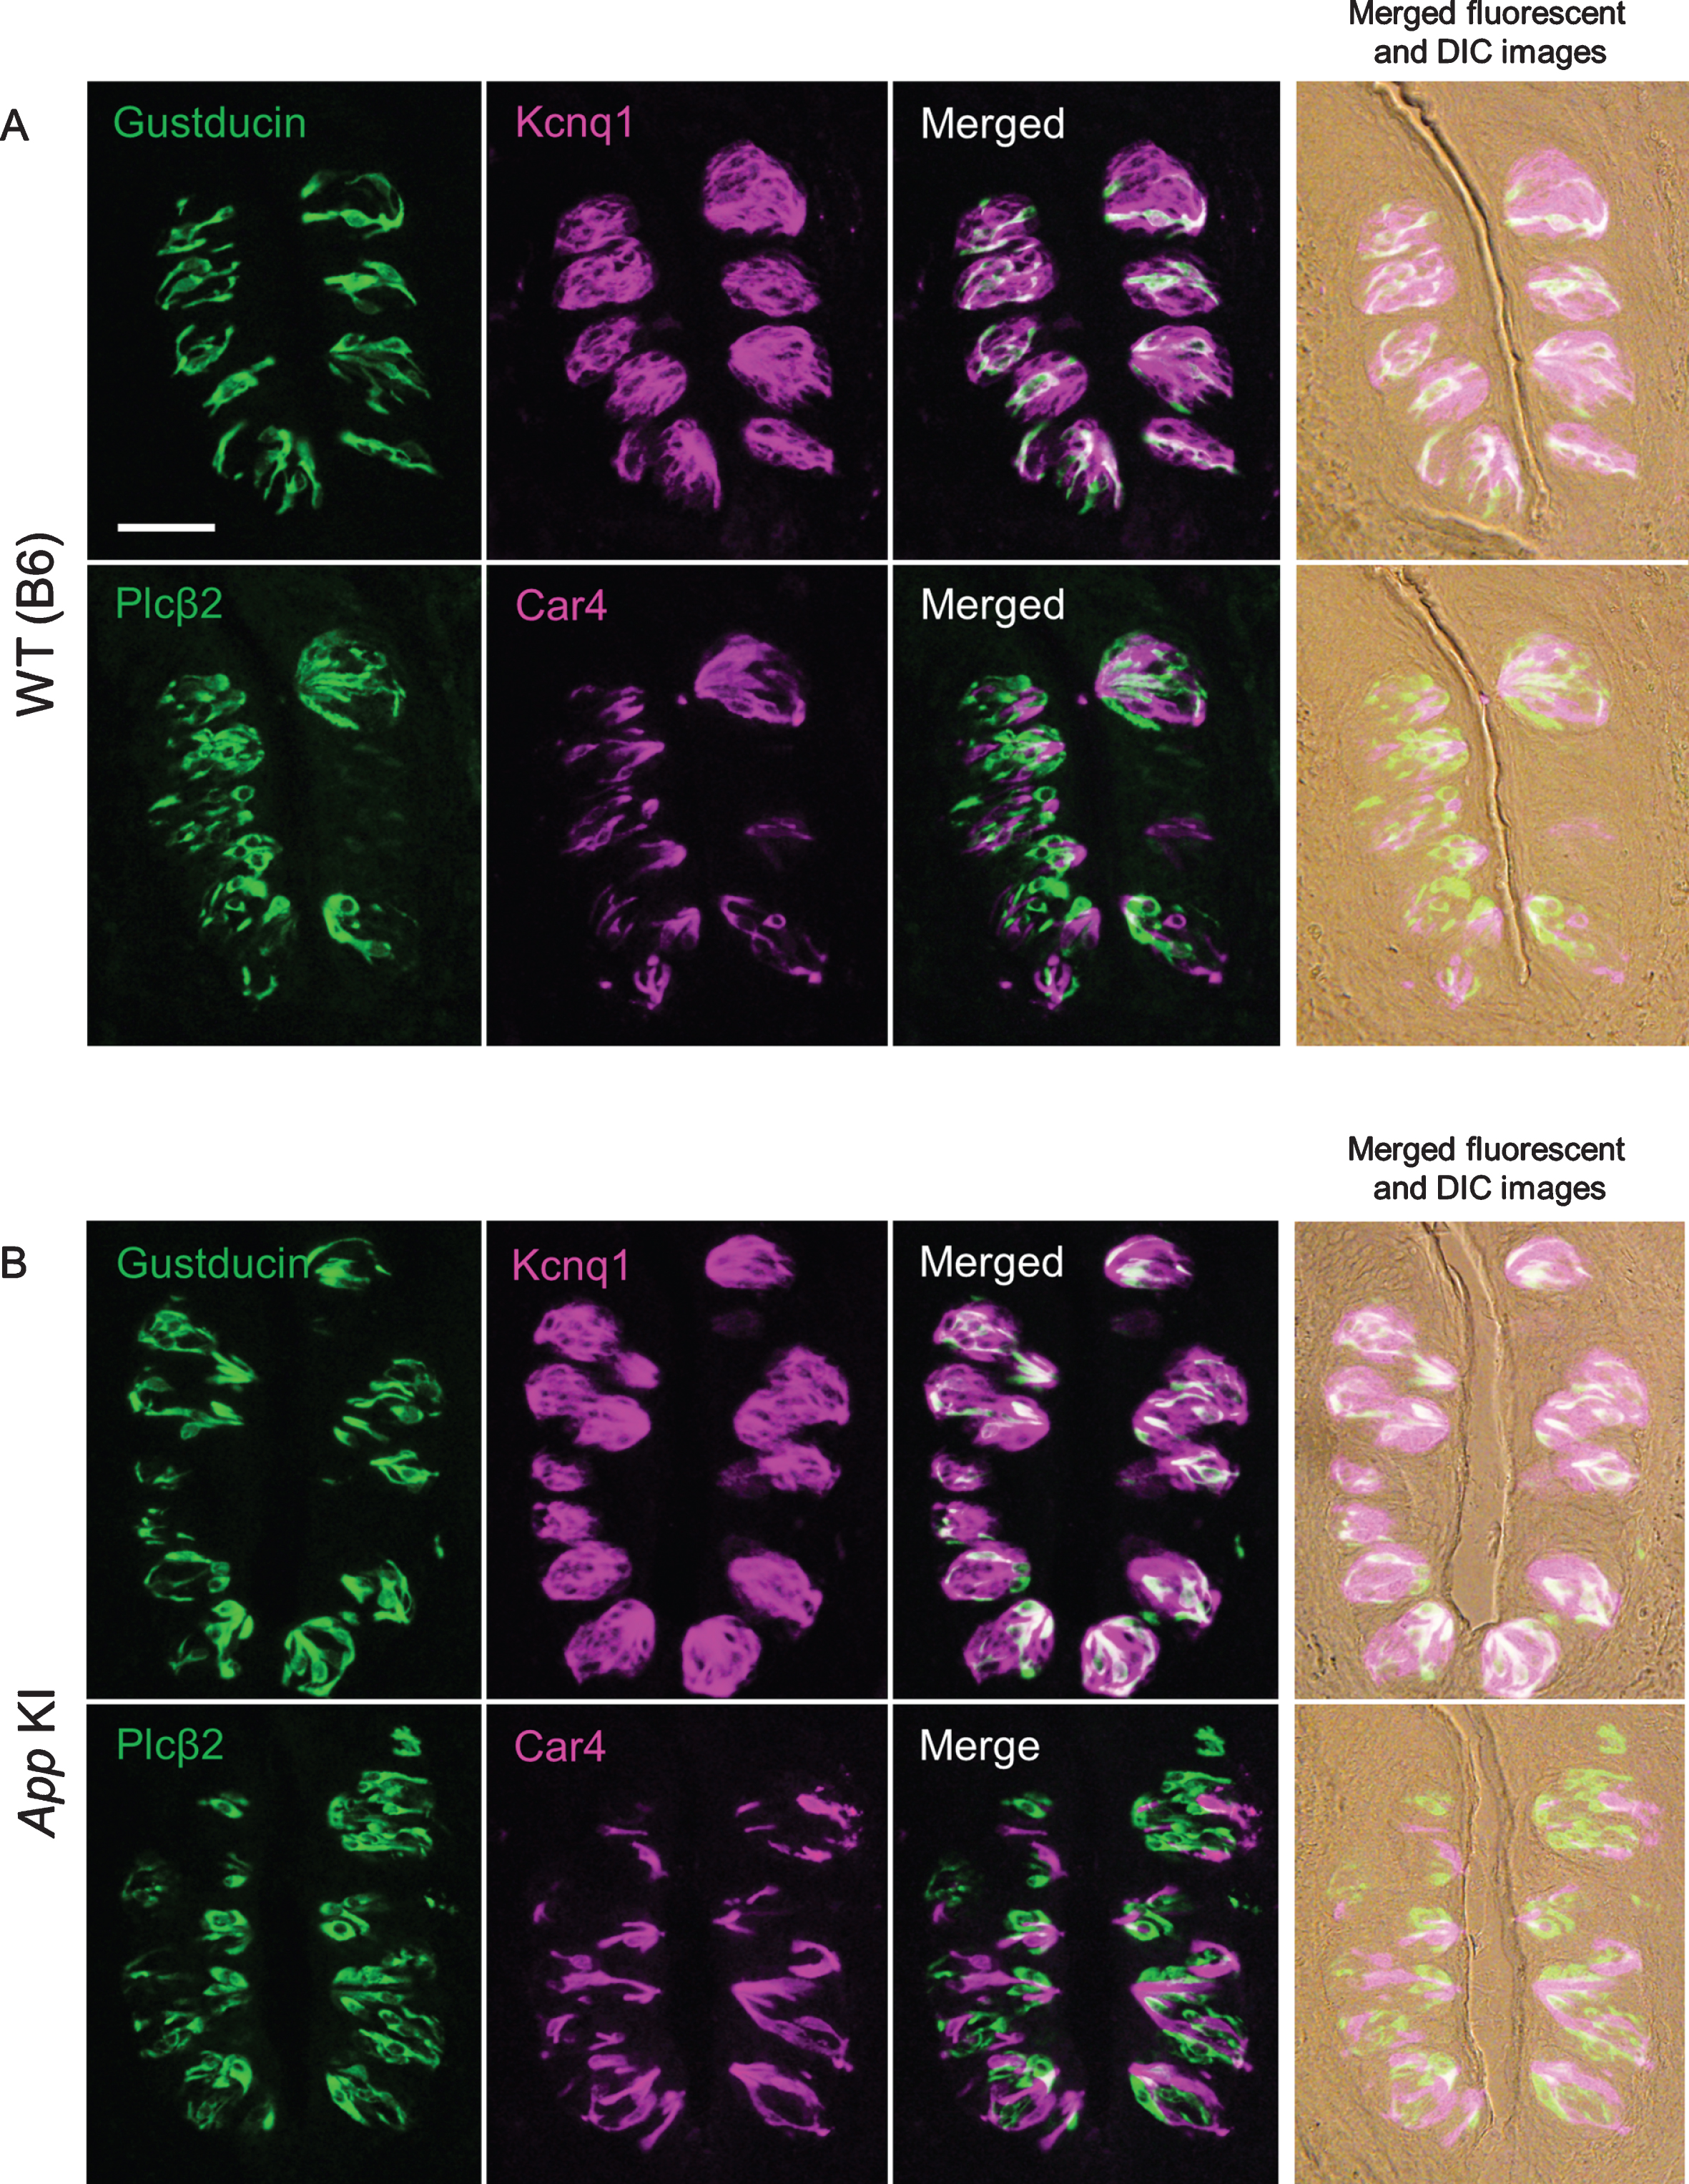 Expression of taste marker molecules in the circumvallate papillae of wild type (WT) (A) and App knock-in (KI) mice (B). Representative double-fluorescence immunostaining images are shown. The immunostaining was examined using antibodies against Gustducin (green) and Kcnq1 (magenta), and Plcβ2 (green) and Car4 (magenta). Right column shows merged fluorescence and differential interference contrast (DIC) images. Scale bar is 50μm.